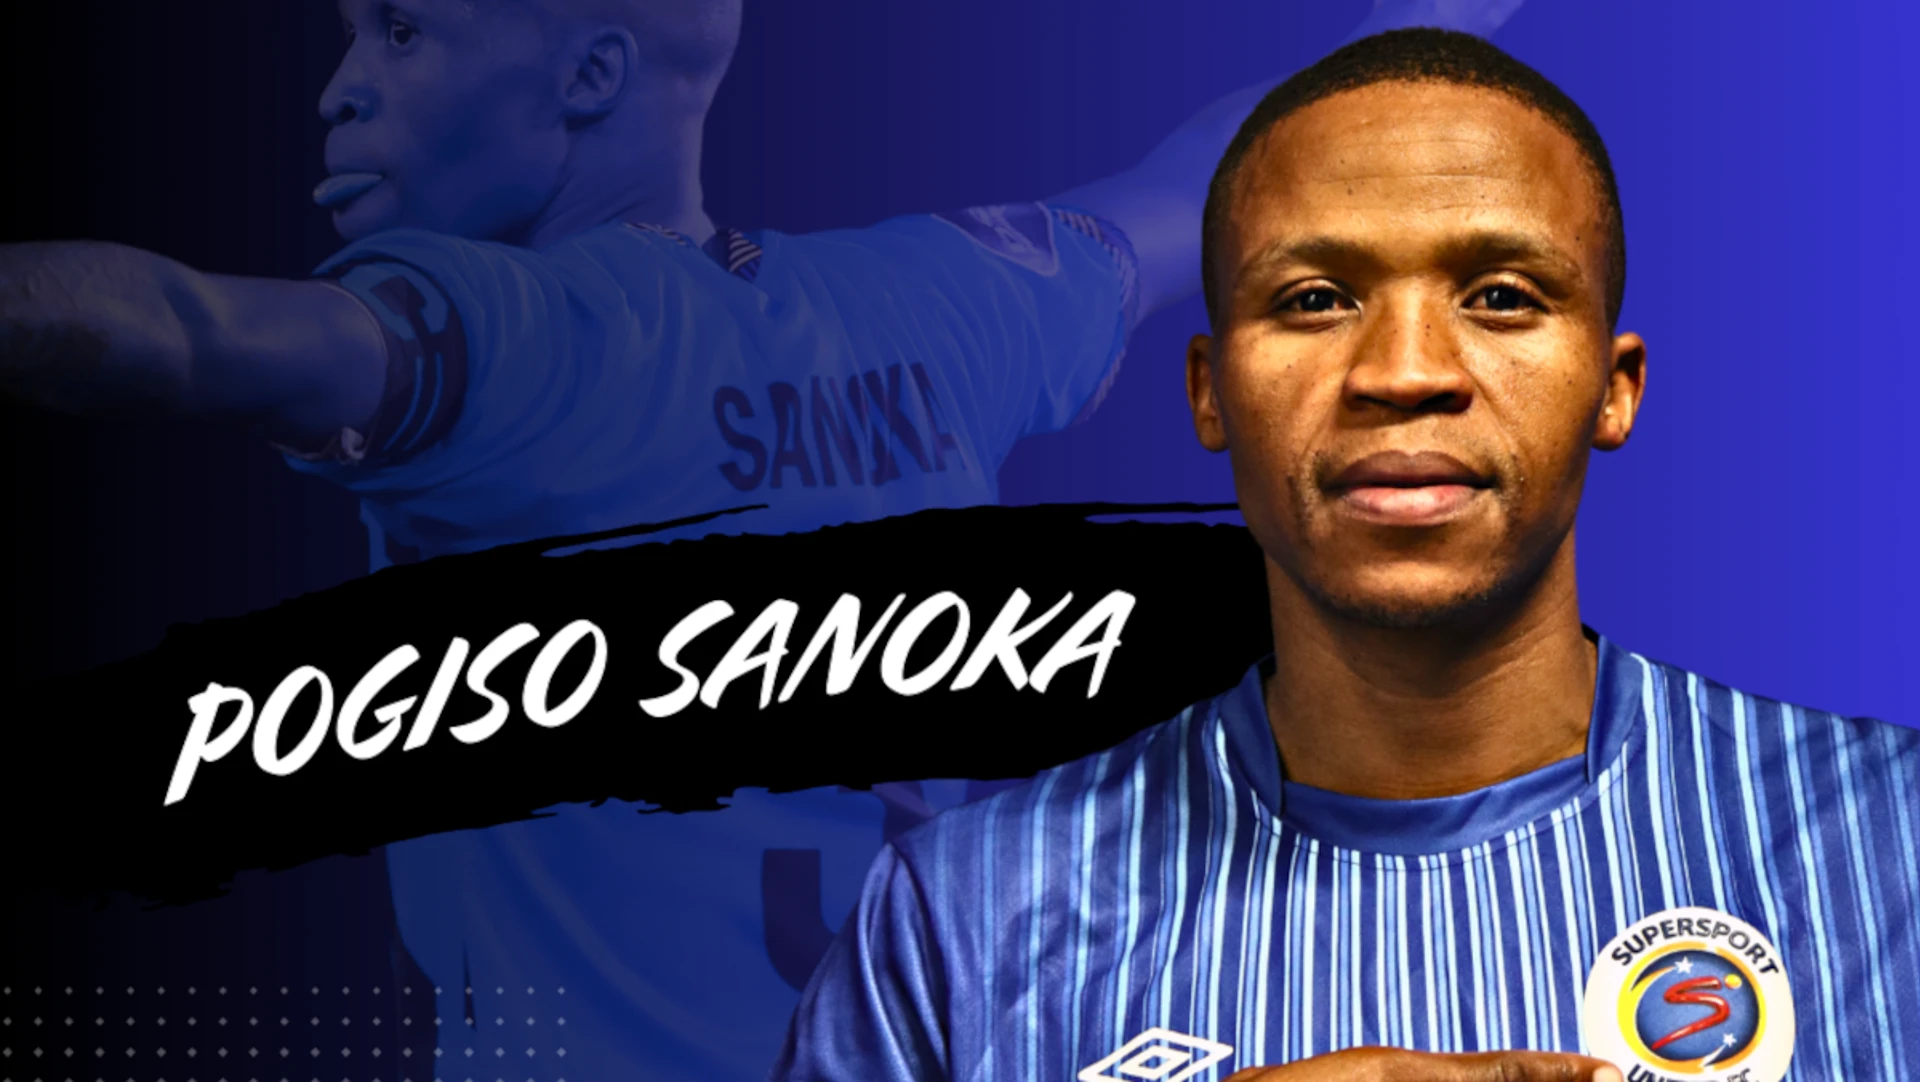  Sanoka joins SuperSport United on two-year deal